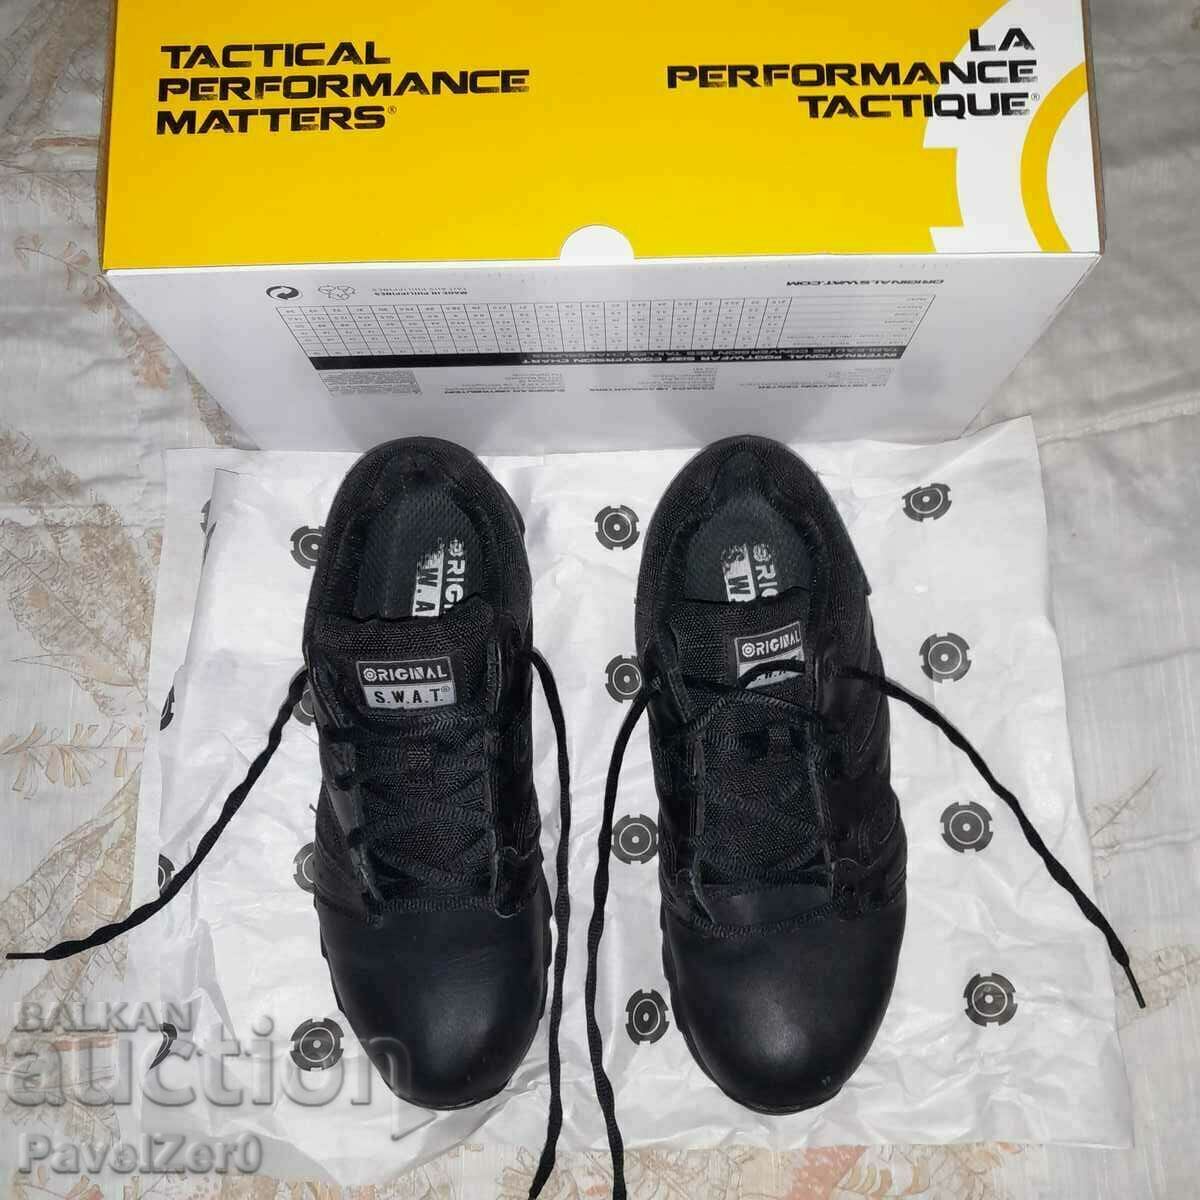 Tactical shoes Chase Low Original S.W.A.T.